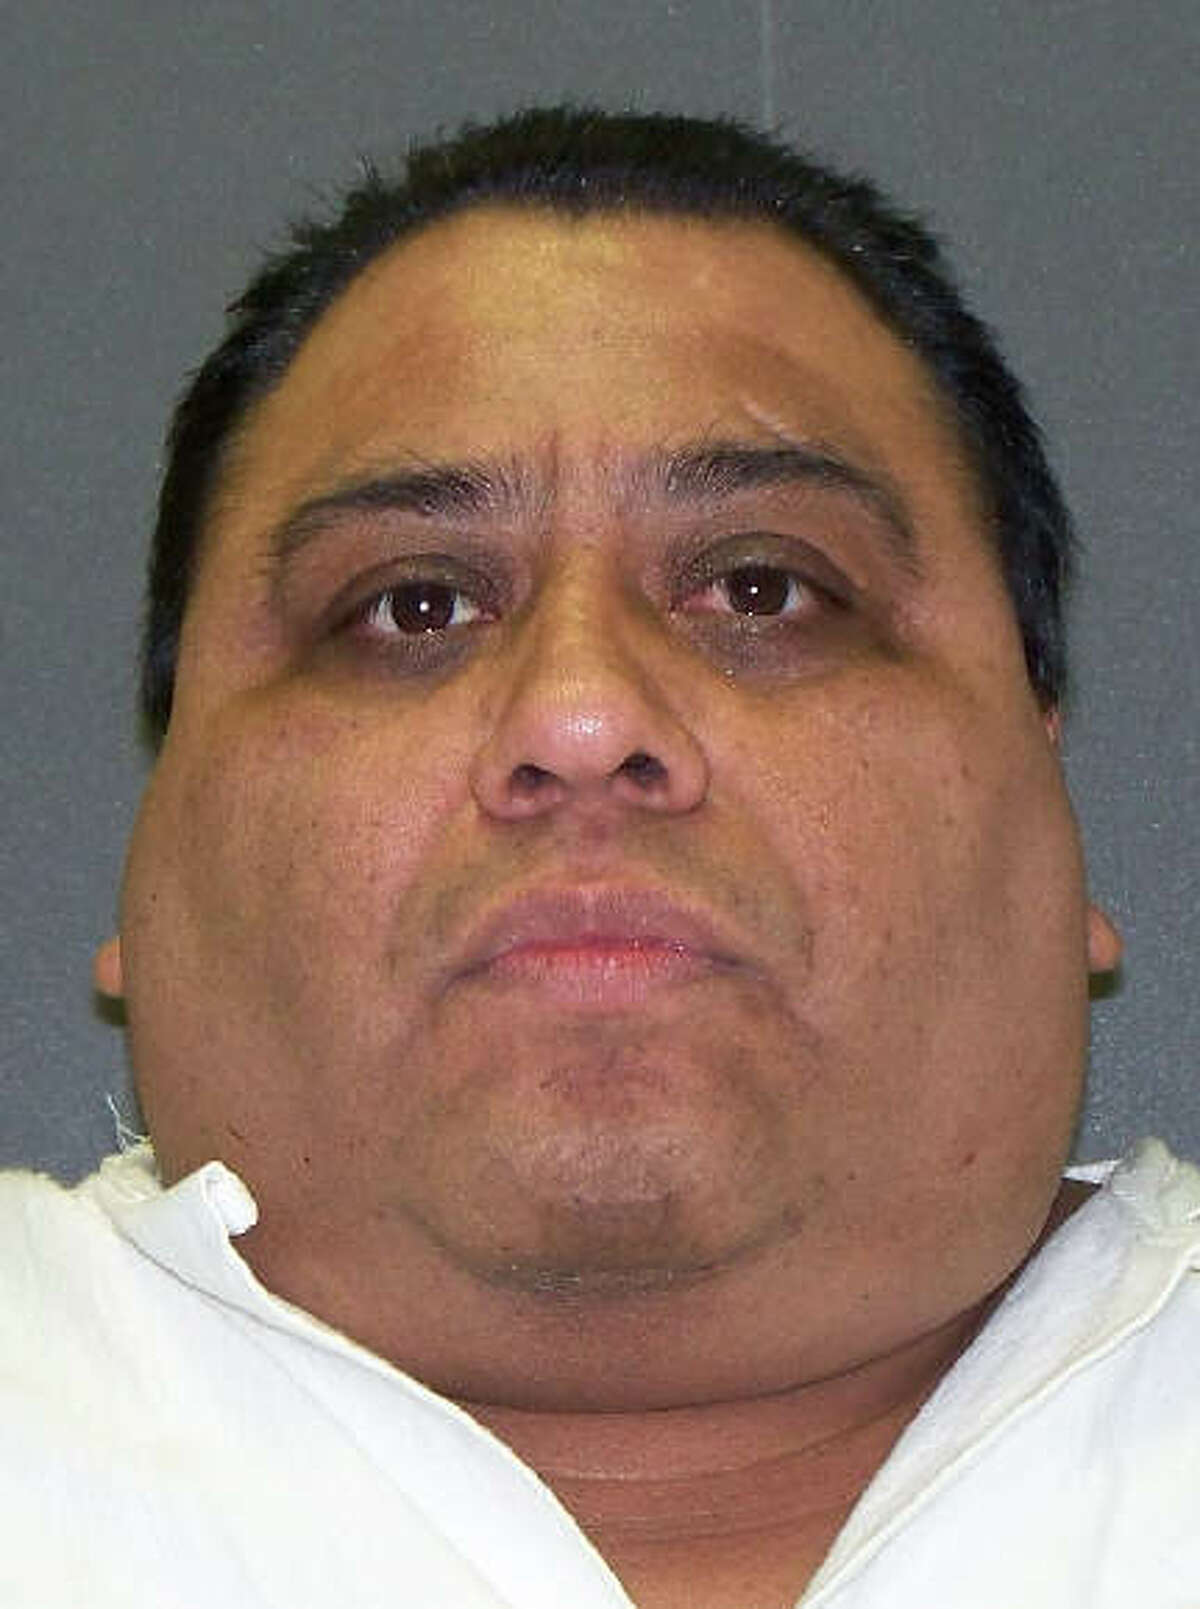 A file photo porvided by the Texas Department of Corrections is of Ramiro Hernandez-Llanas. who was scheduled to die Wednesday April 9, 2014, is shown in this file image provided by the Texas Department of Criminal Justice. Hernandez- Llanas, who escaped prison in his native Mexico while serving a murder sentence was headed to the Texas death chamber Wednesday for the fatal beating a former Baylor University history professor and attack on his wife more than 16 years ago. (AP Photo/Texas Department of Criminal Justice, File)